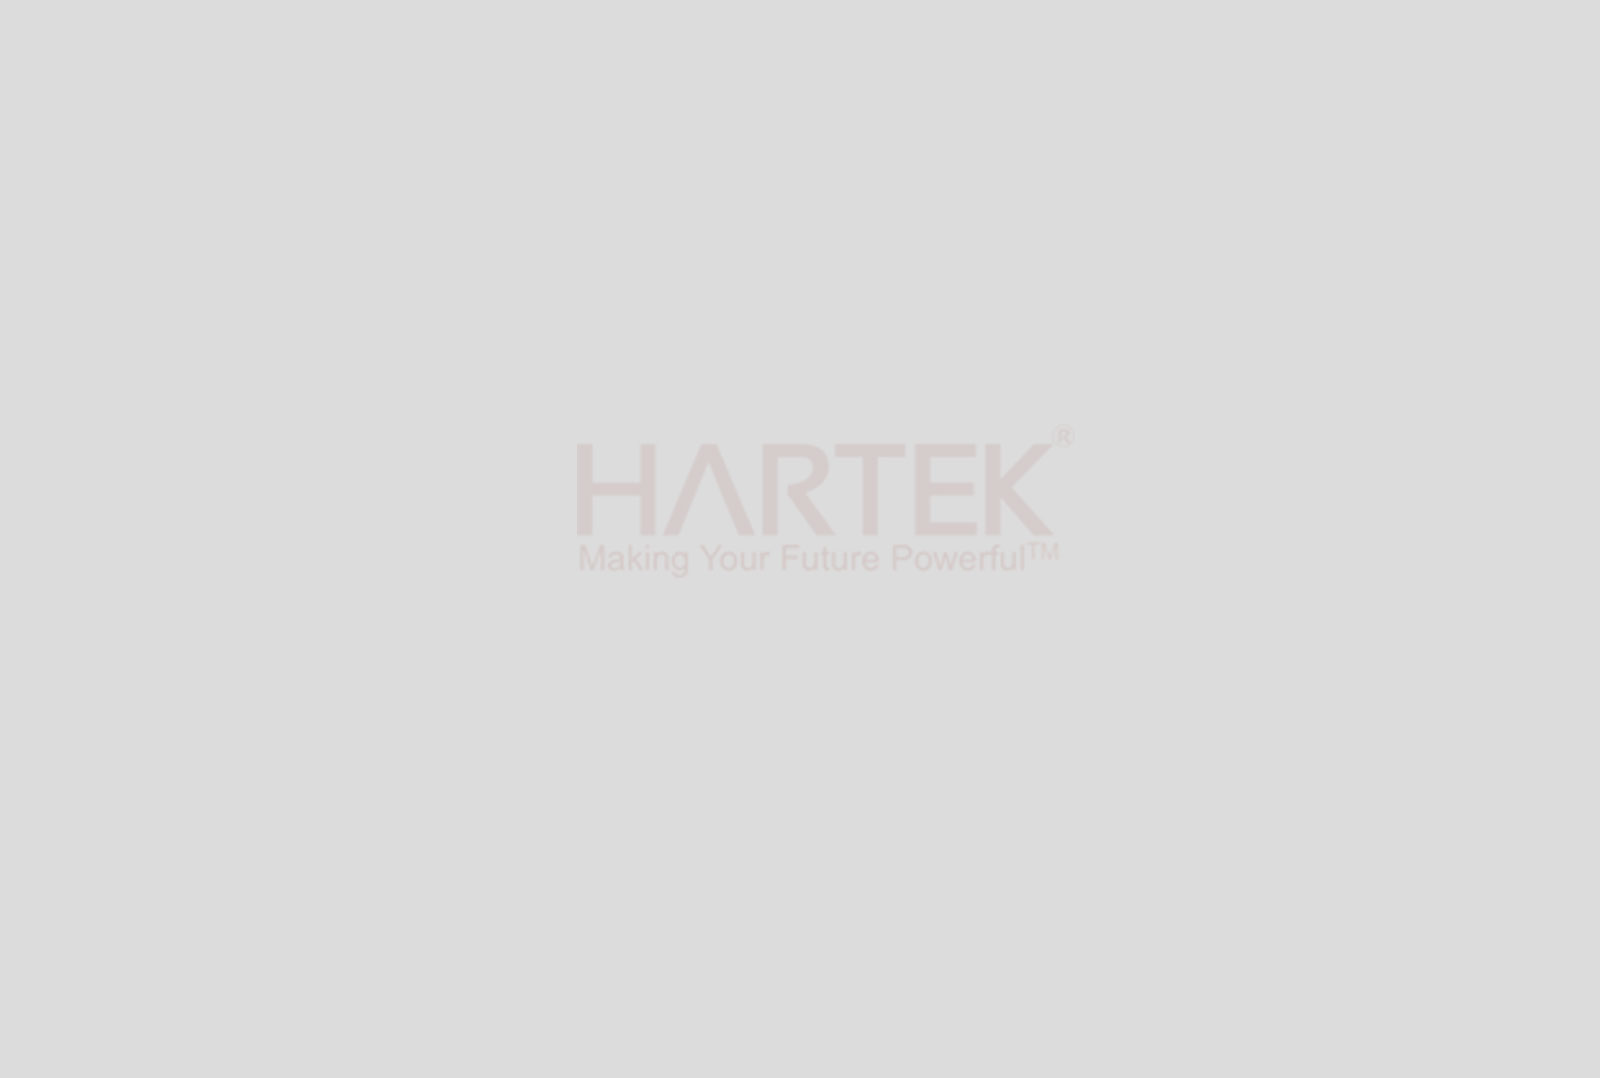 Hartek Power bets big on South India, targets 500-MW Solar EPC orders in next financial year